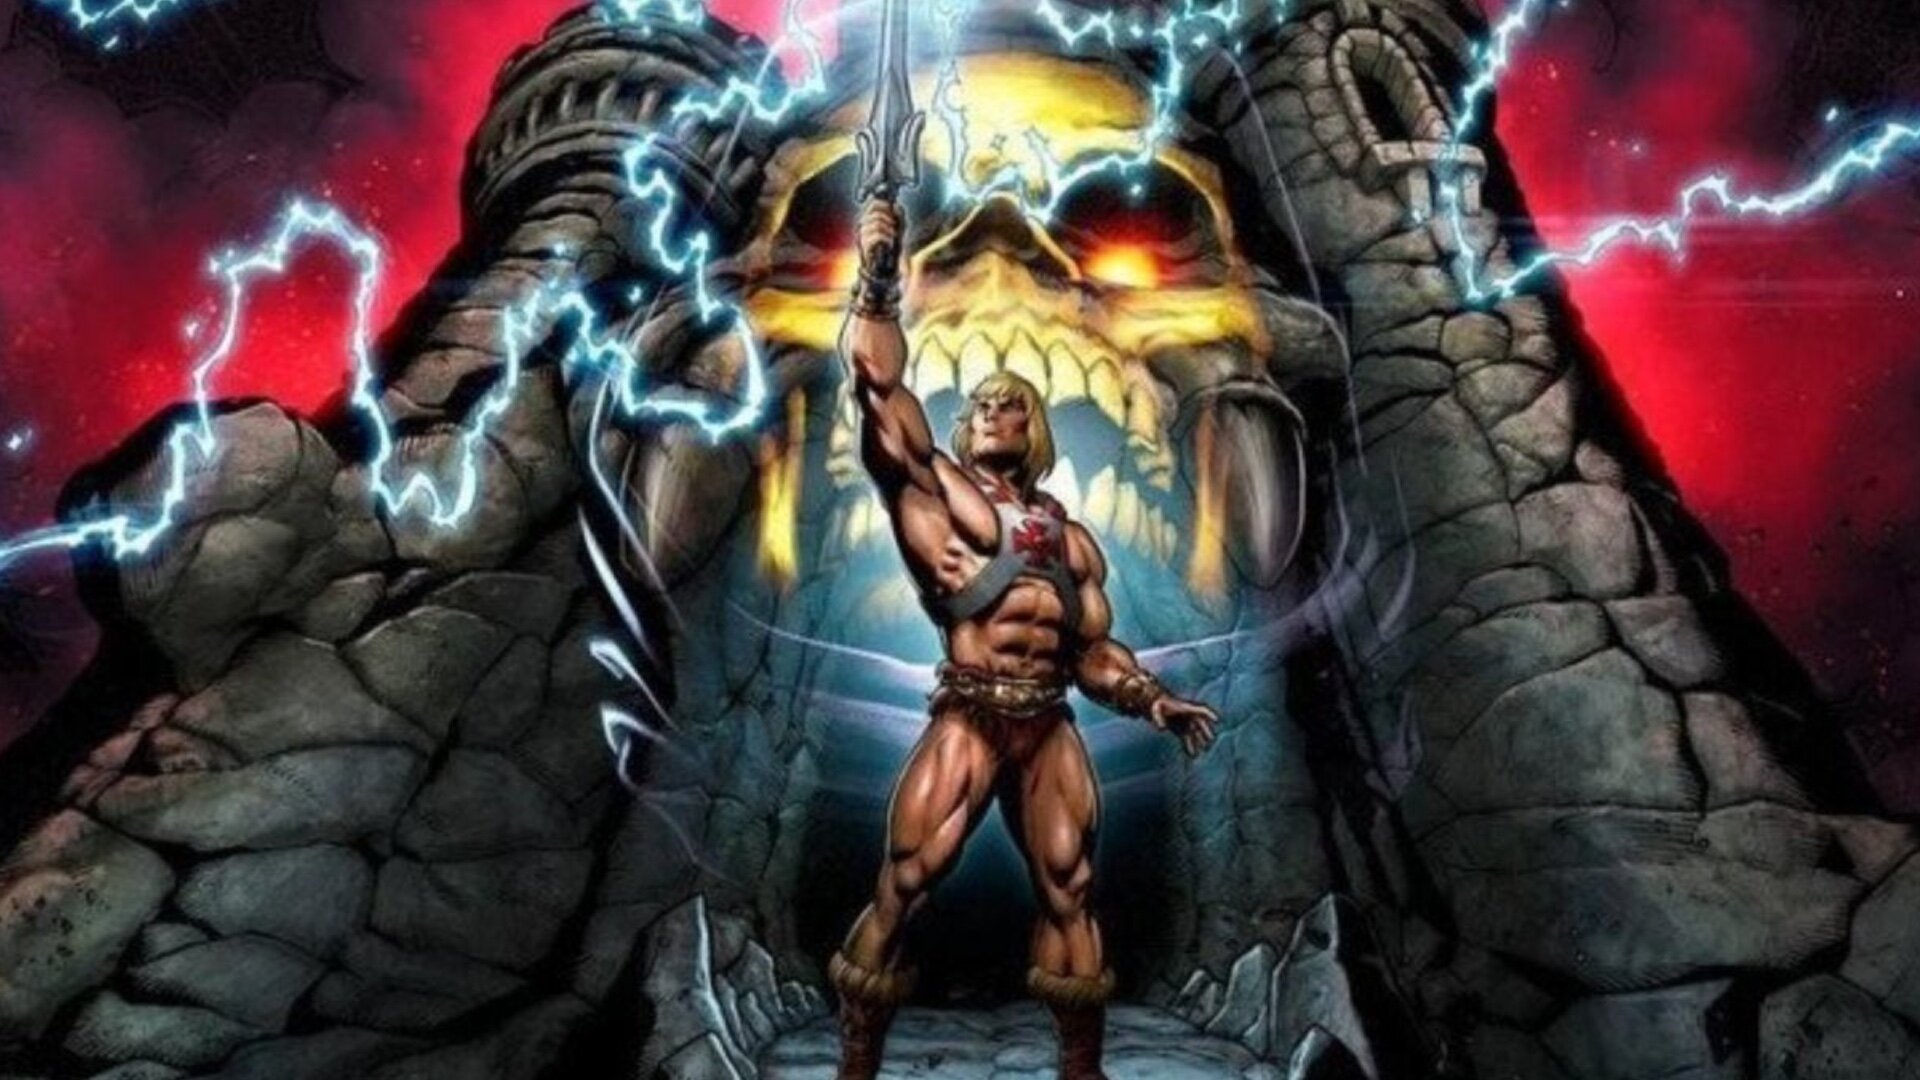 Kevin Smith's MASTERS OF THE UNIVERSE: REVELATION Series Has Inspired a New Line of Action Figures